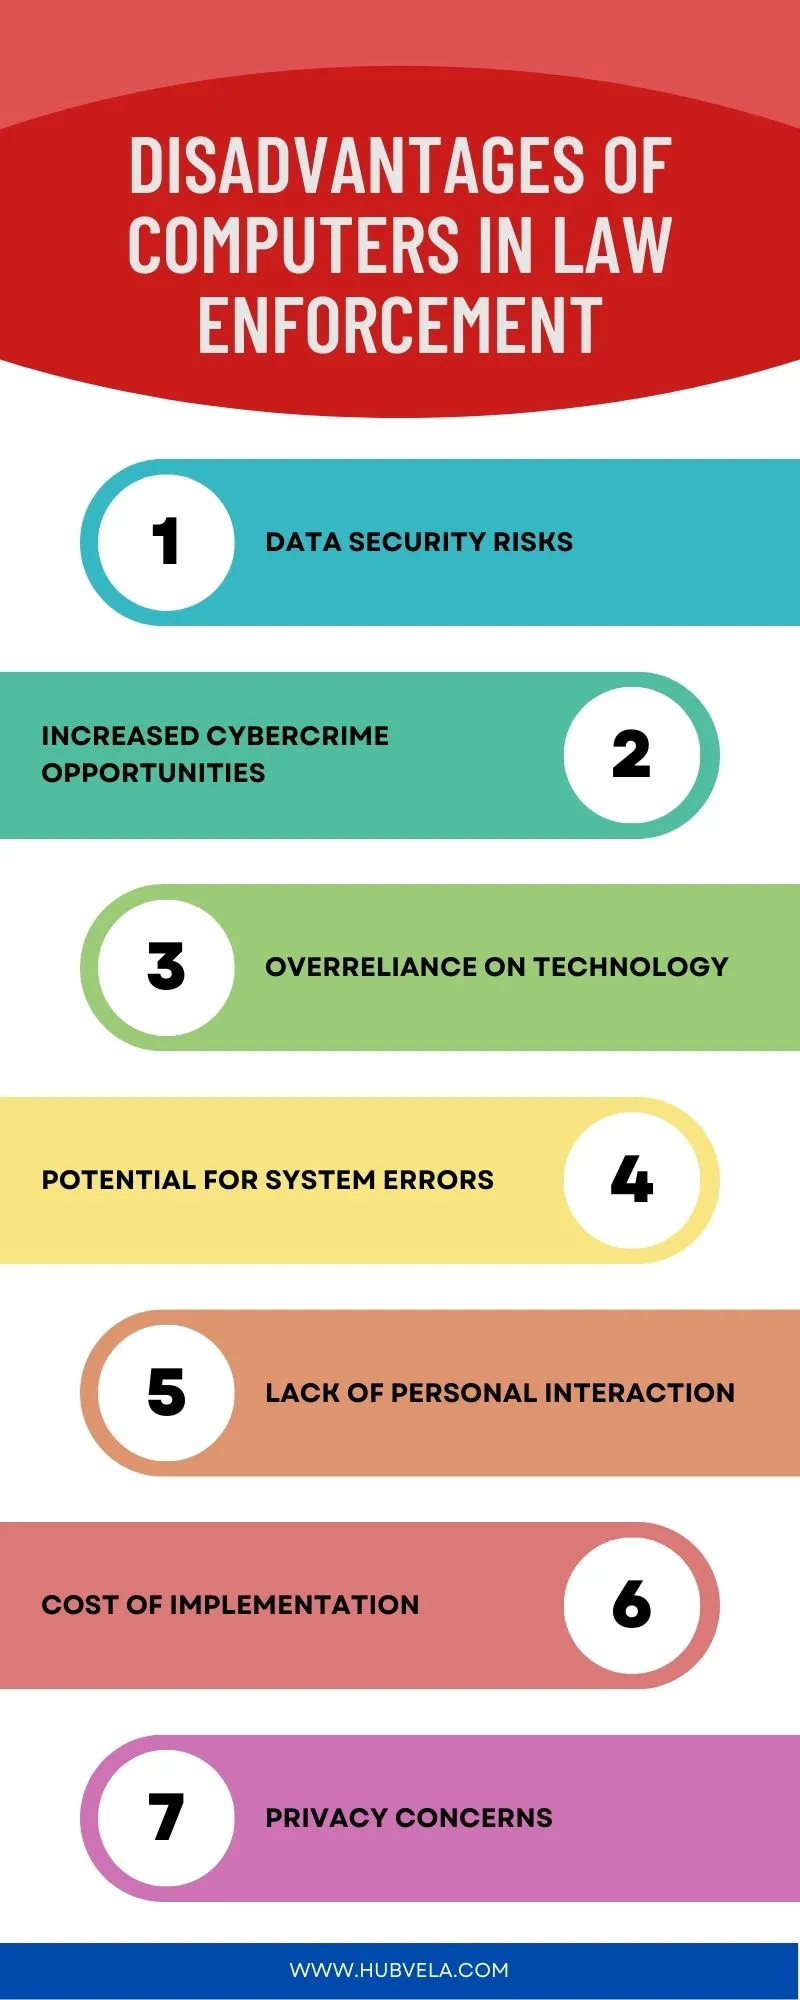 Disadvantages of Computers in Law Enforcement Infographic